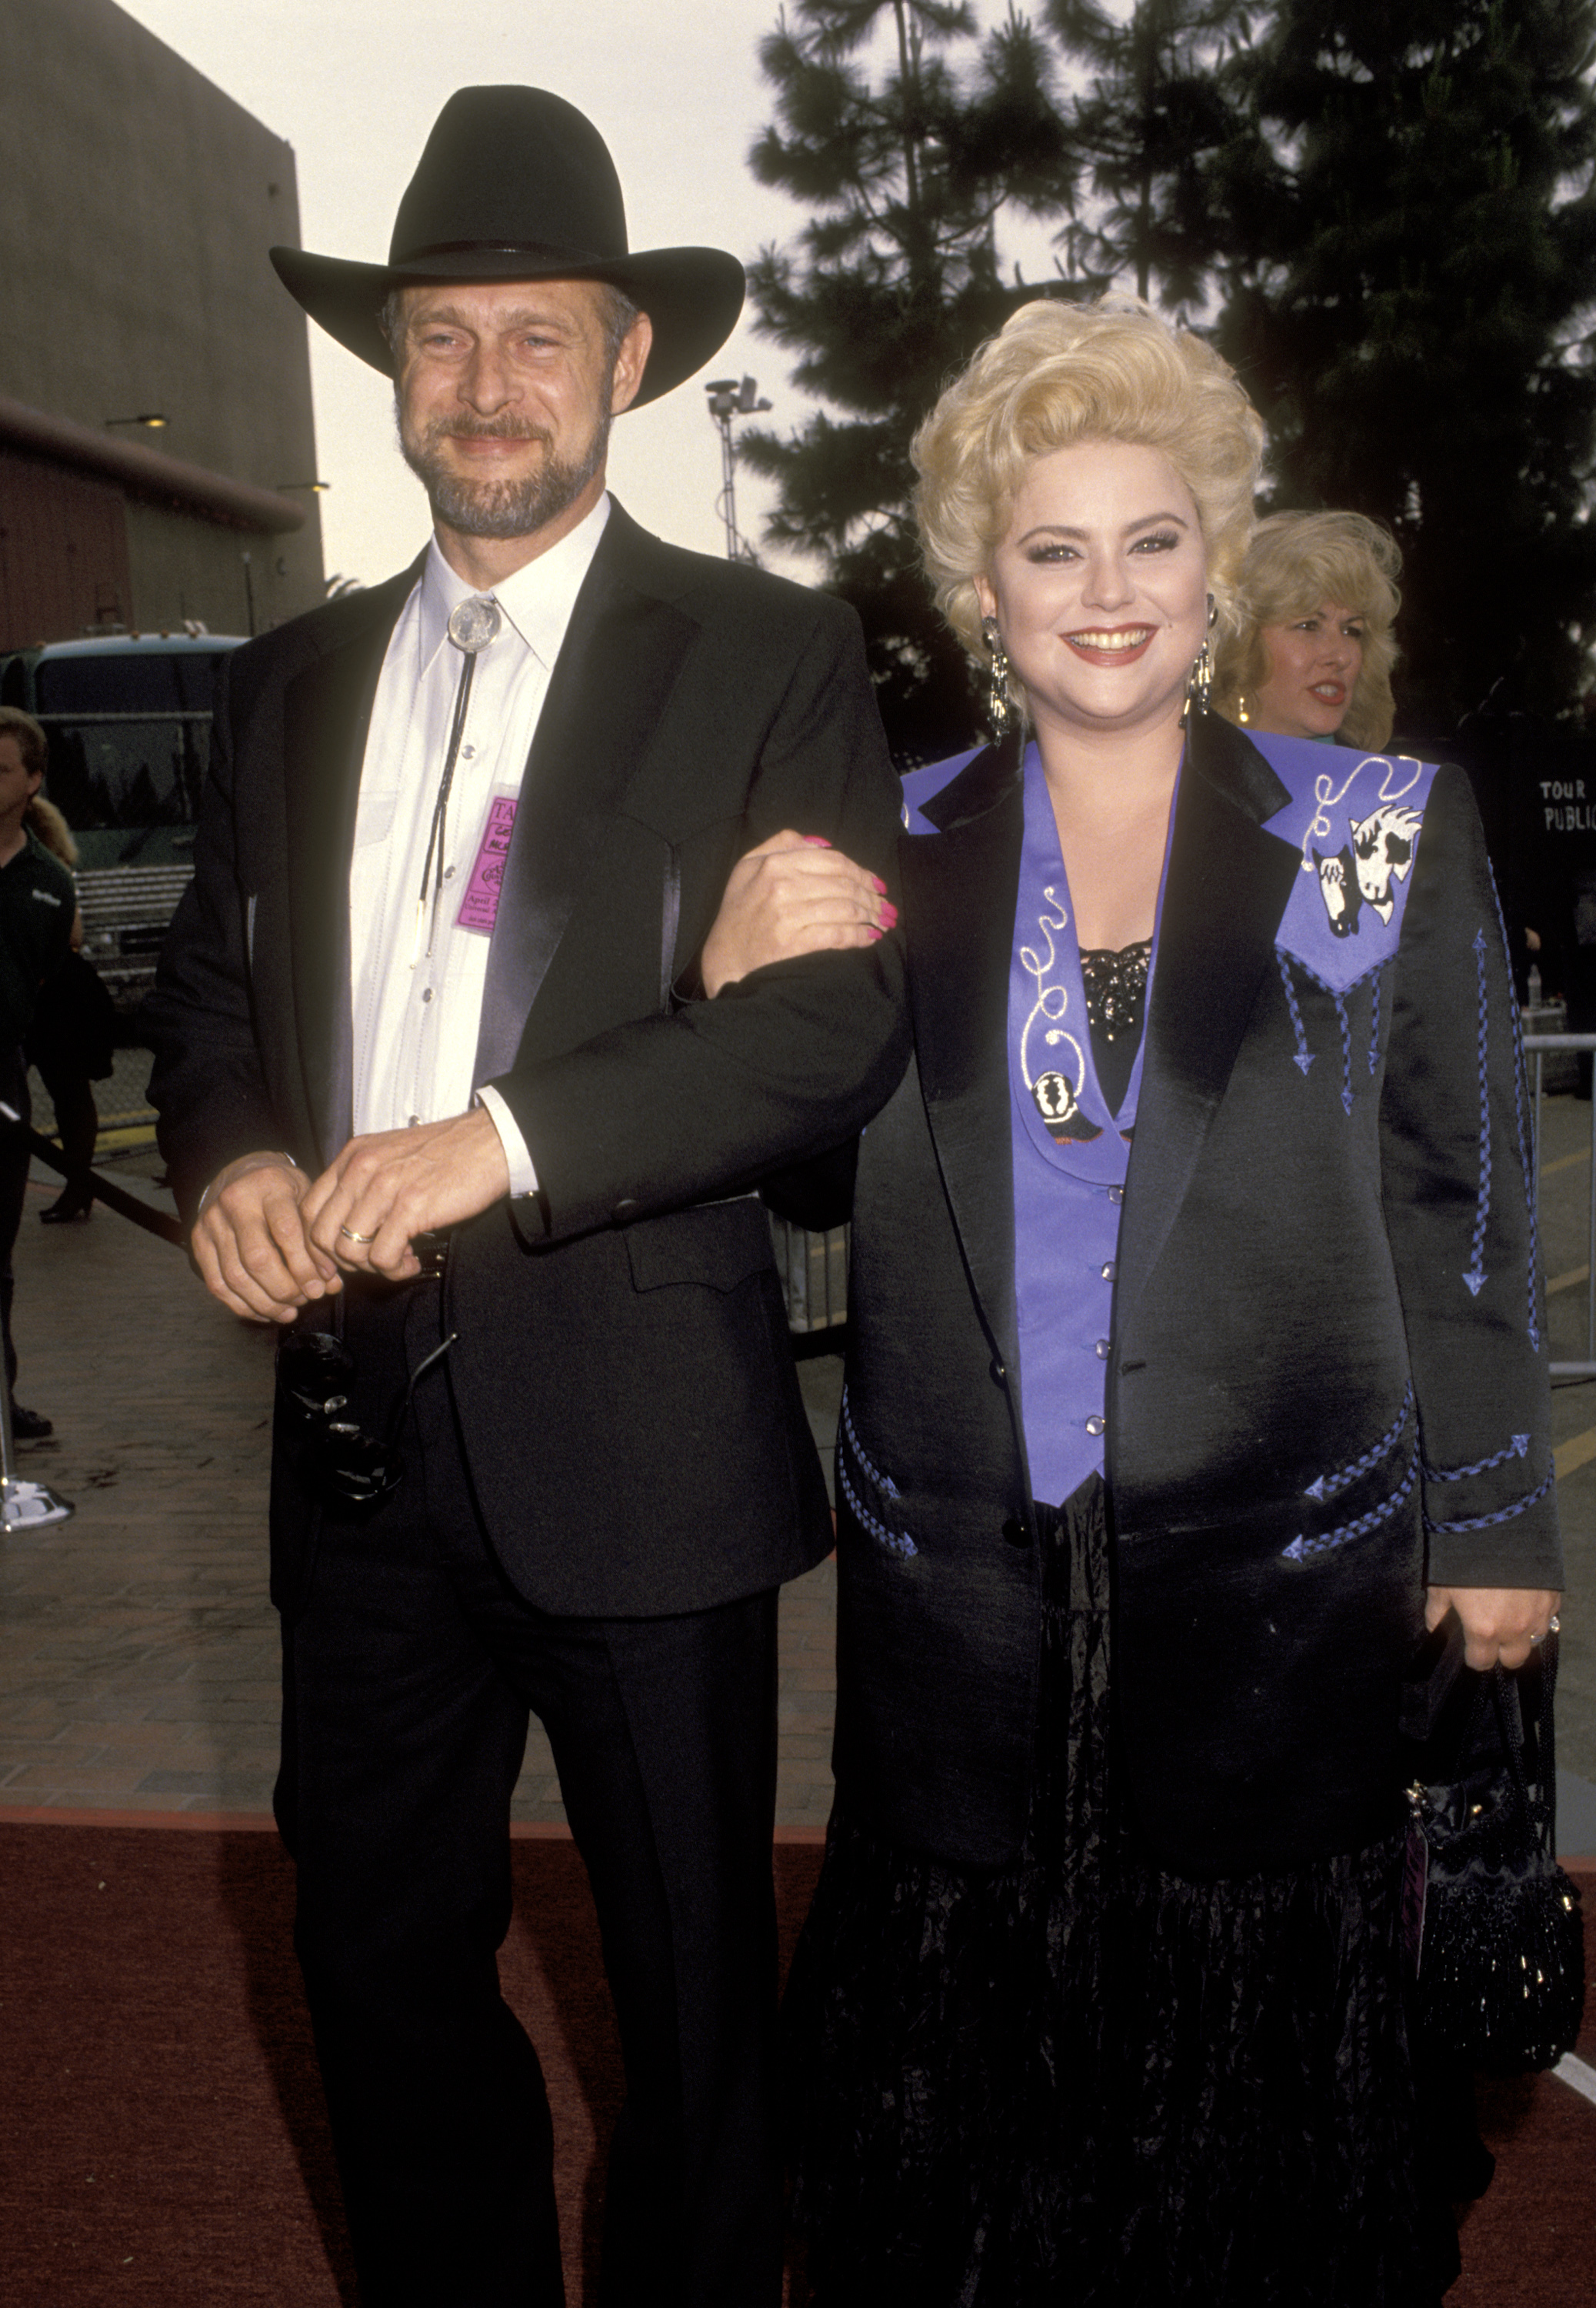 Gerald McRaney and Delta Burke at the 27th Annual Academy of Country Music Awards at the Shrine Auditorium in Los Angeles, on April 29, 1992 | Source: Getty Images